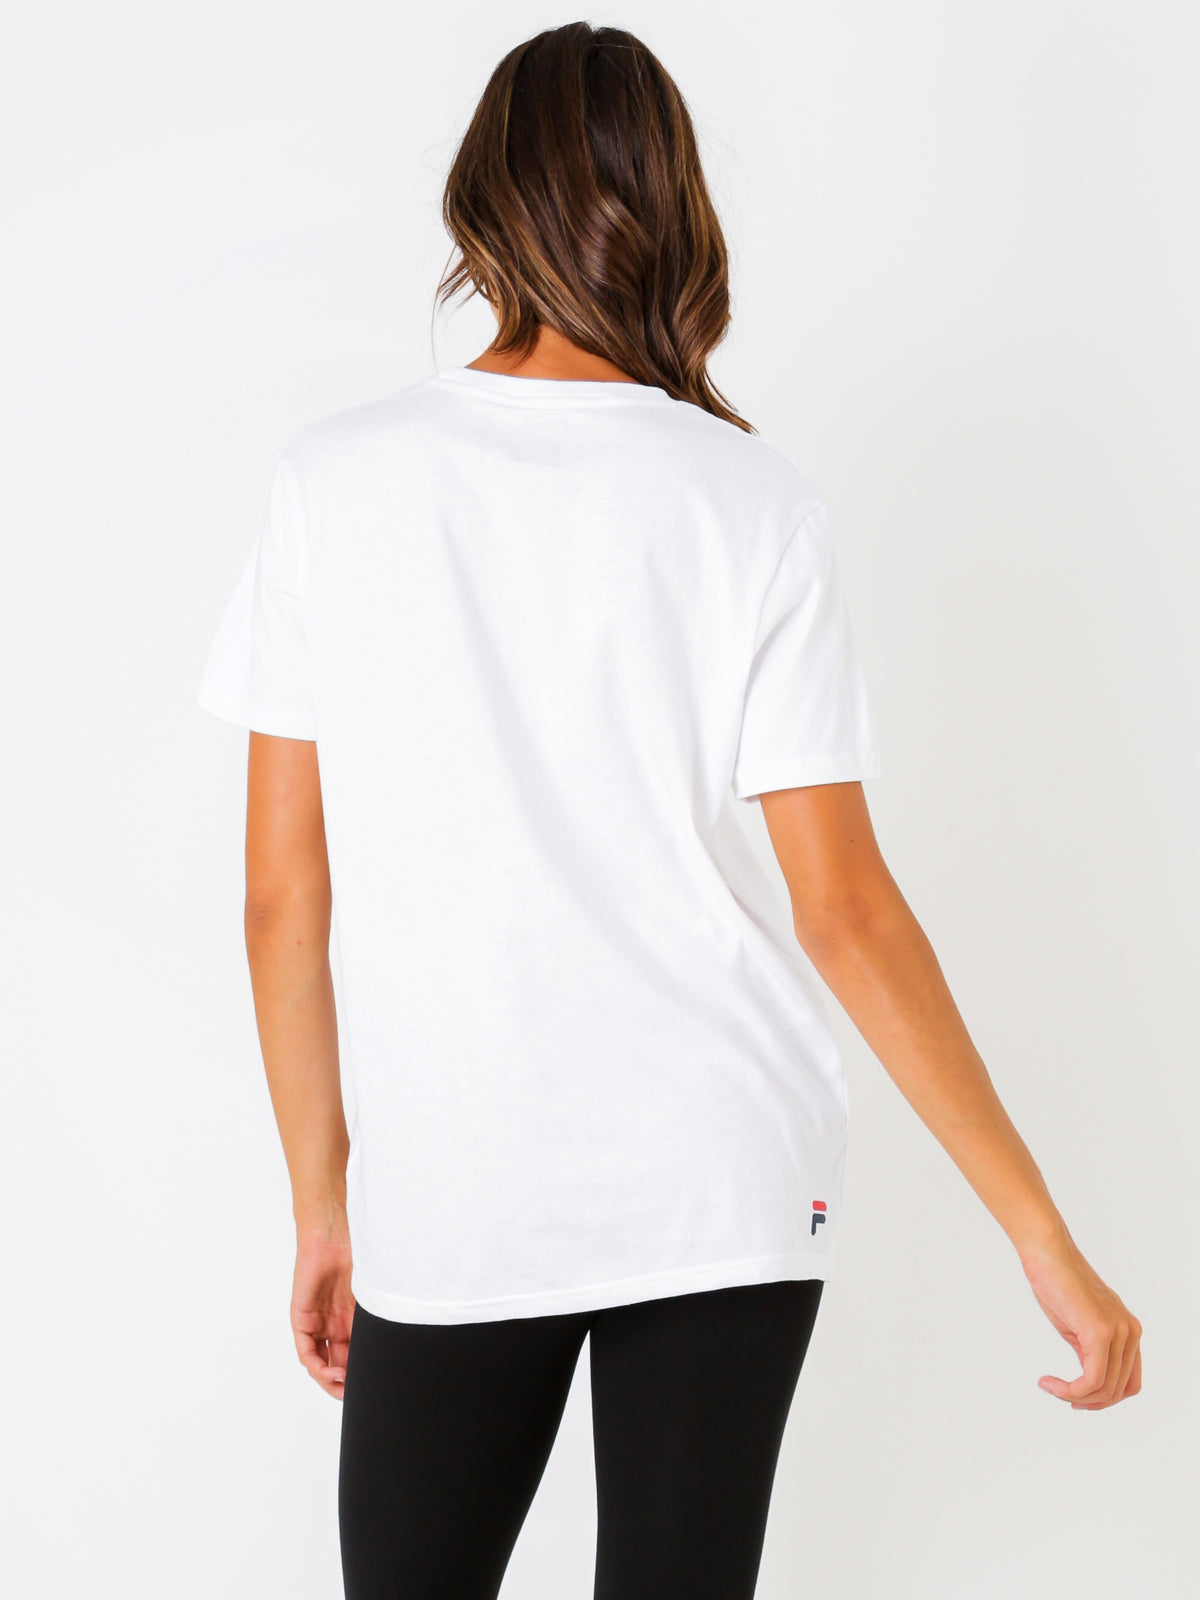 Heritage T-Shirt in White